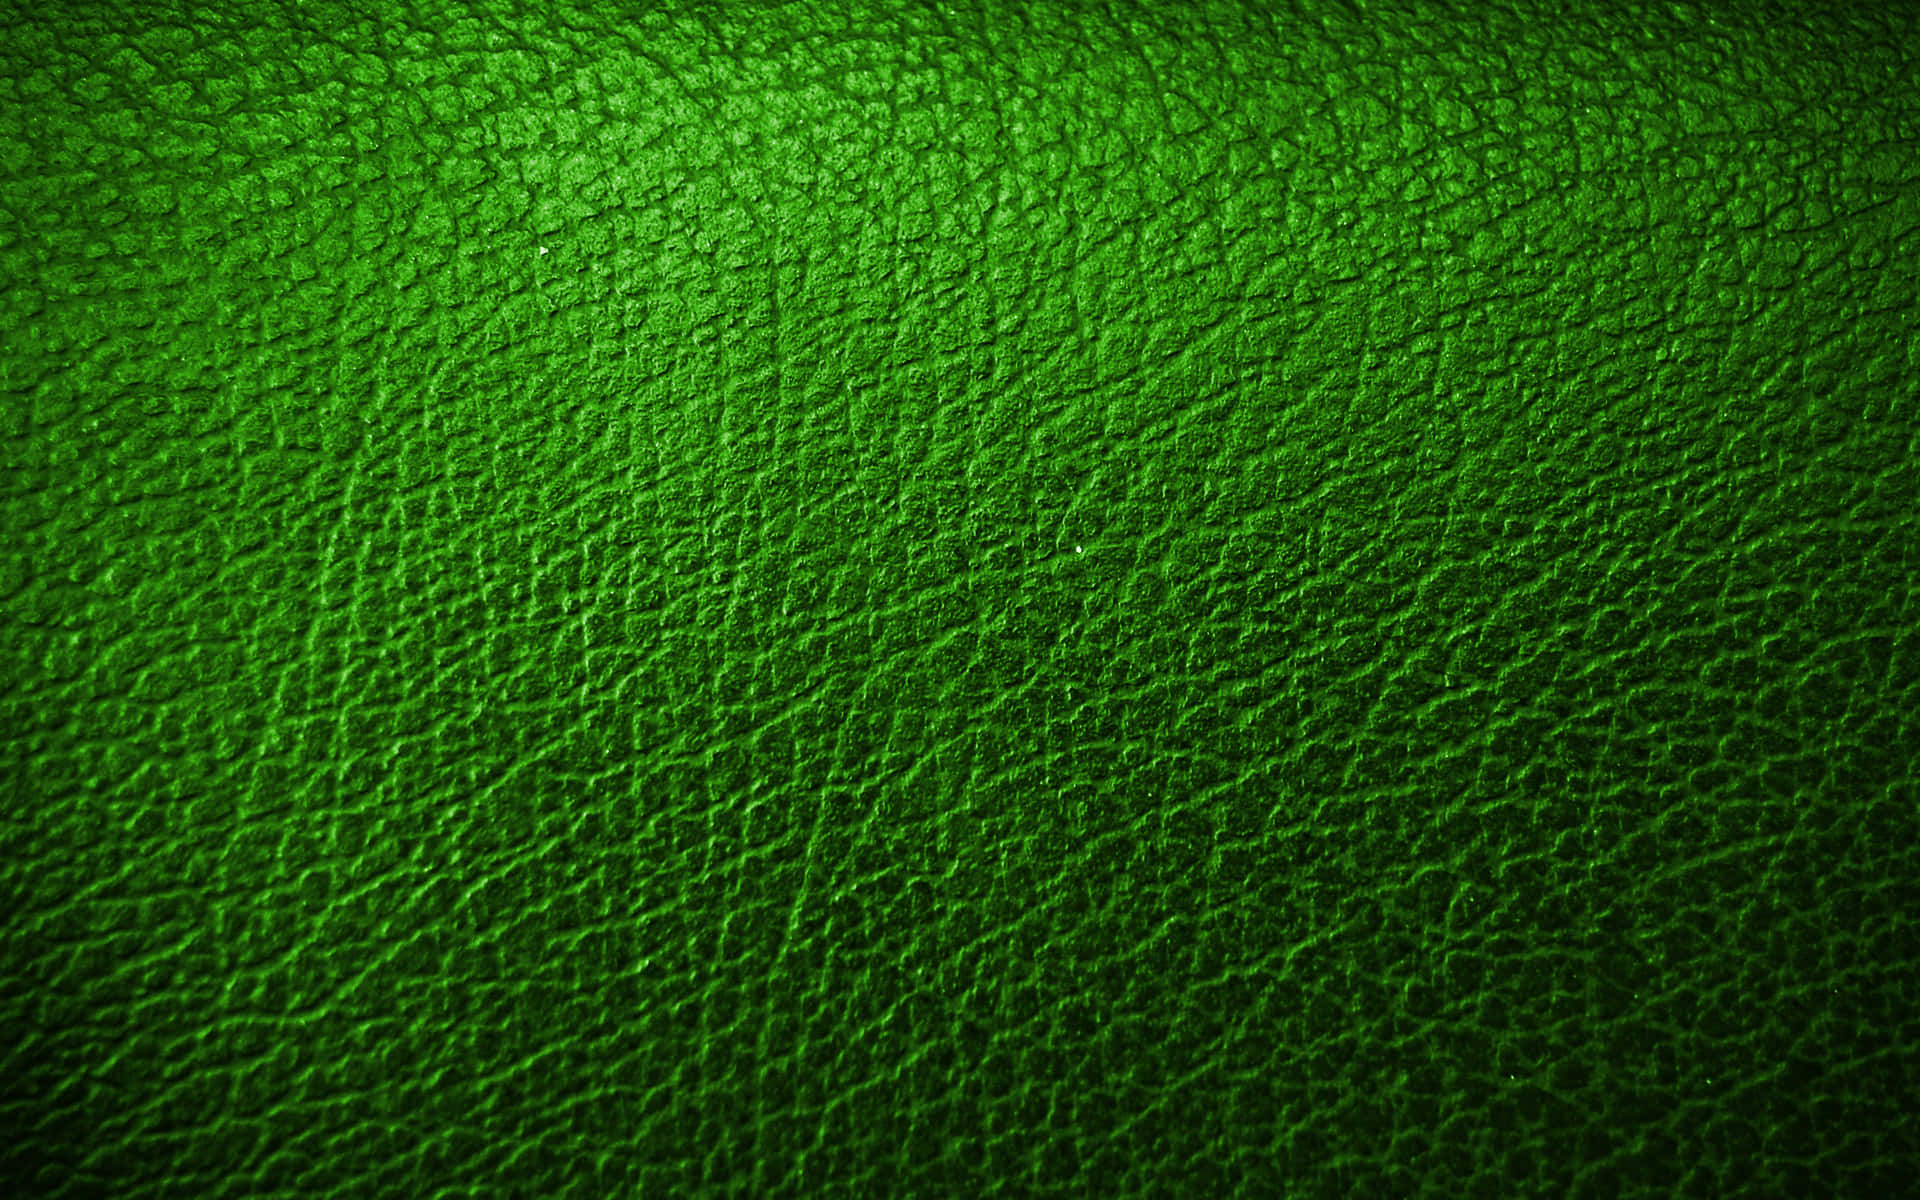 Premium leather background perfect for any creative project